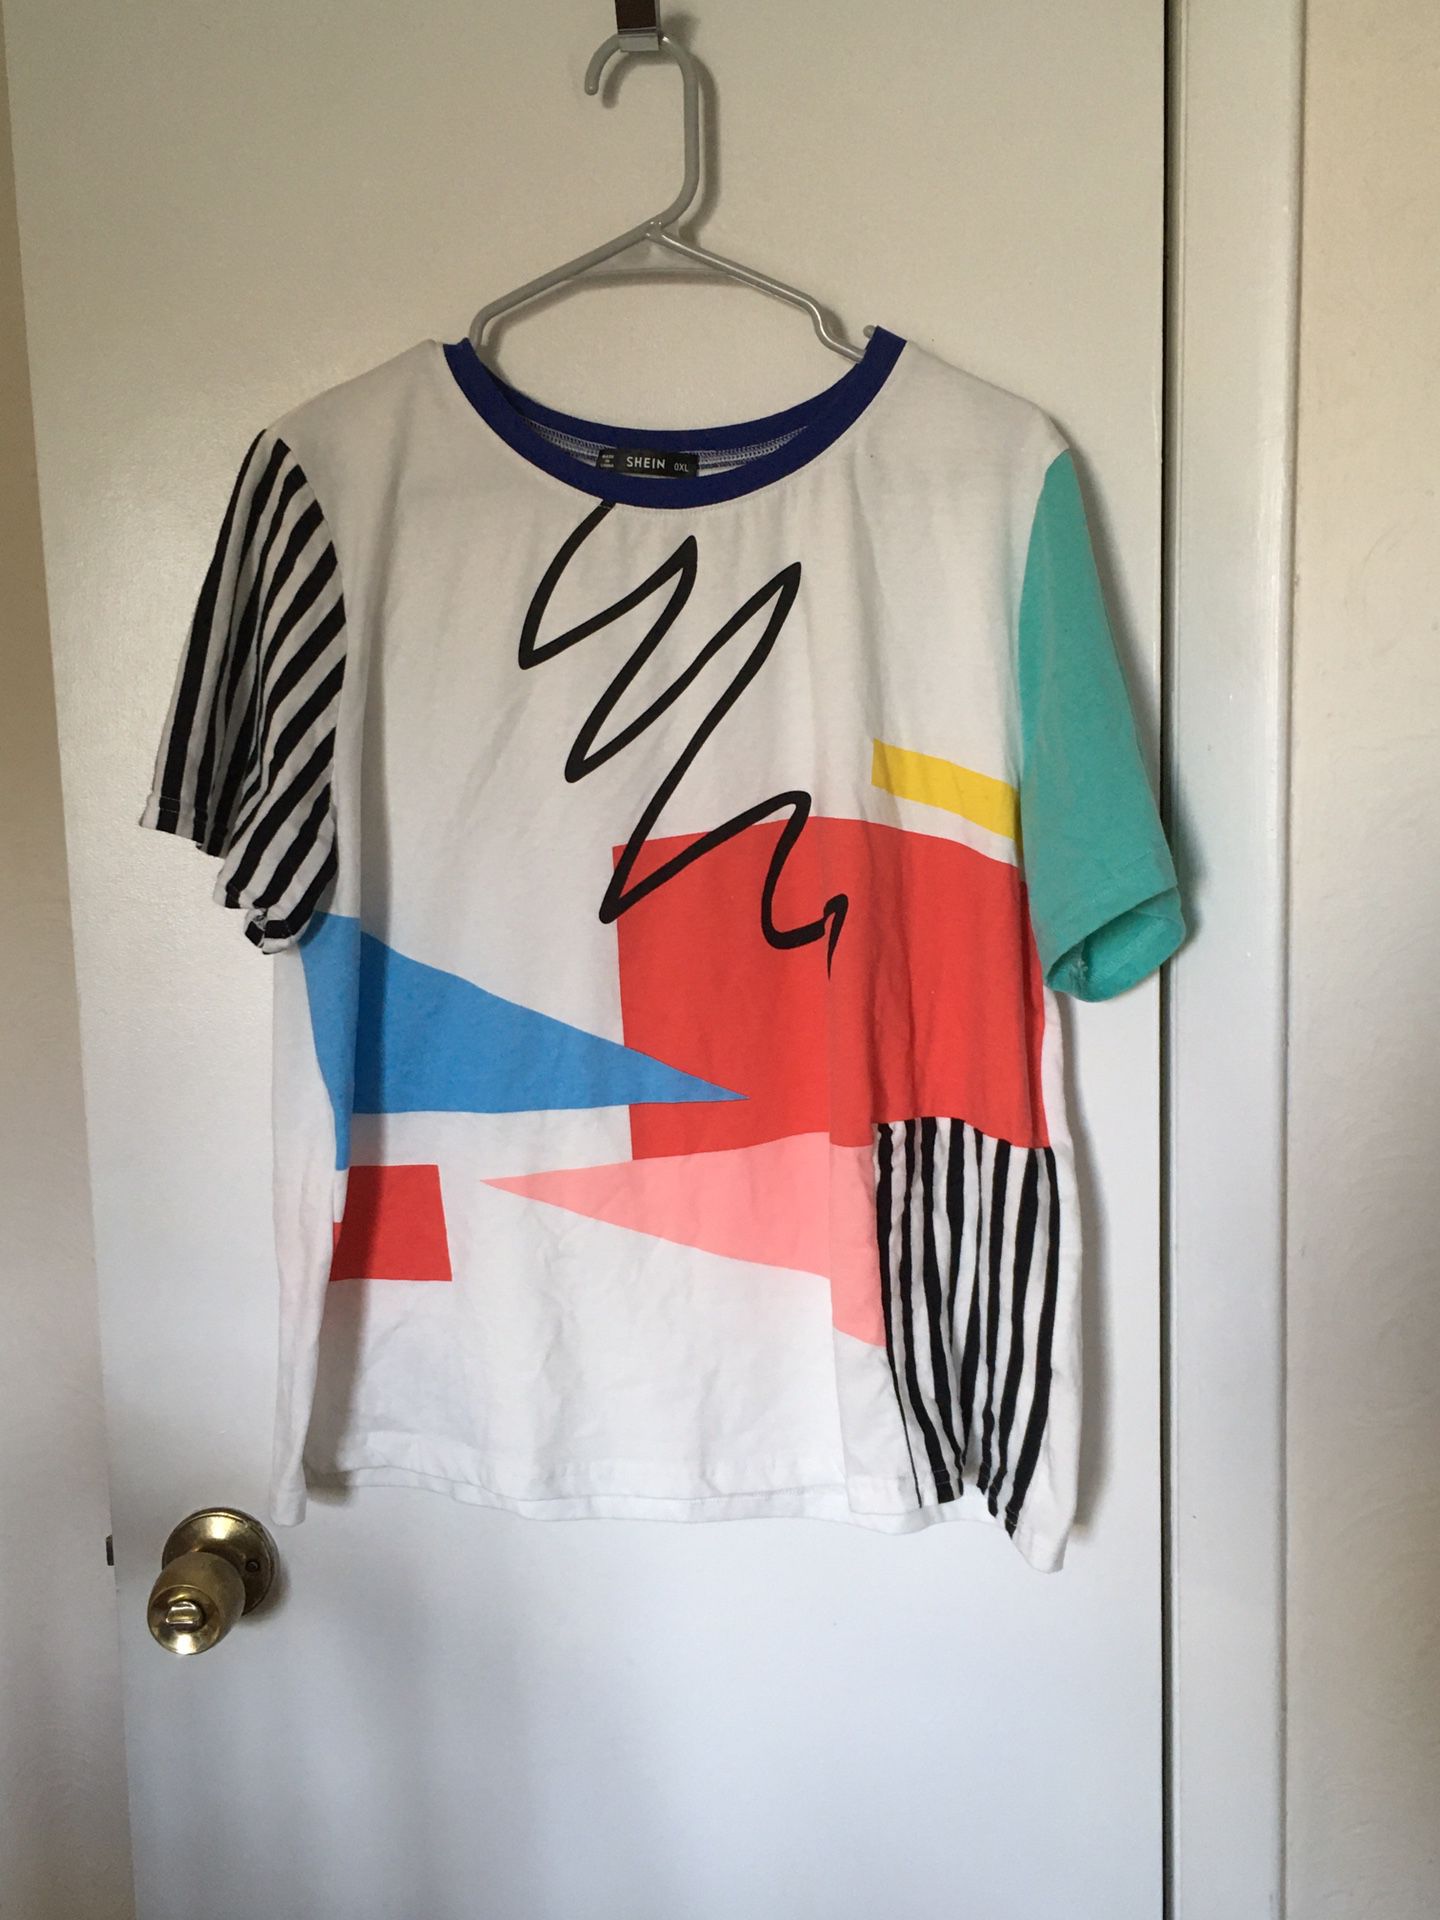 90s Styled T